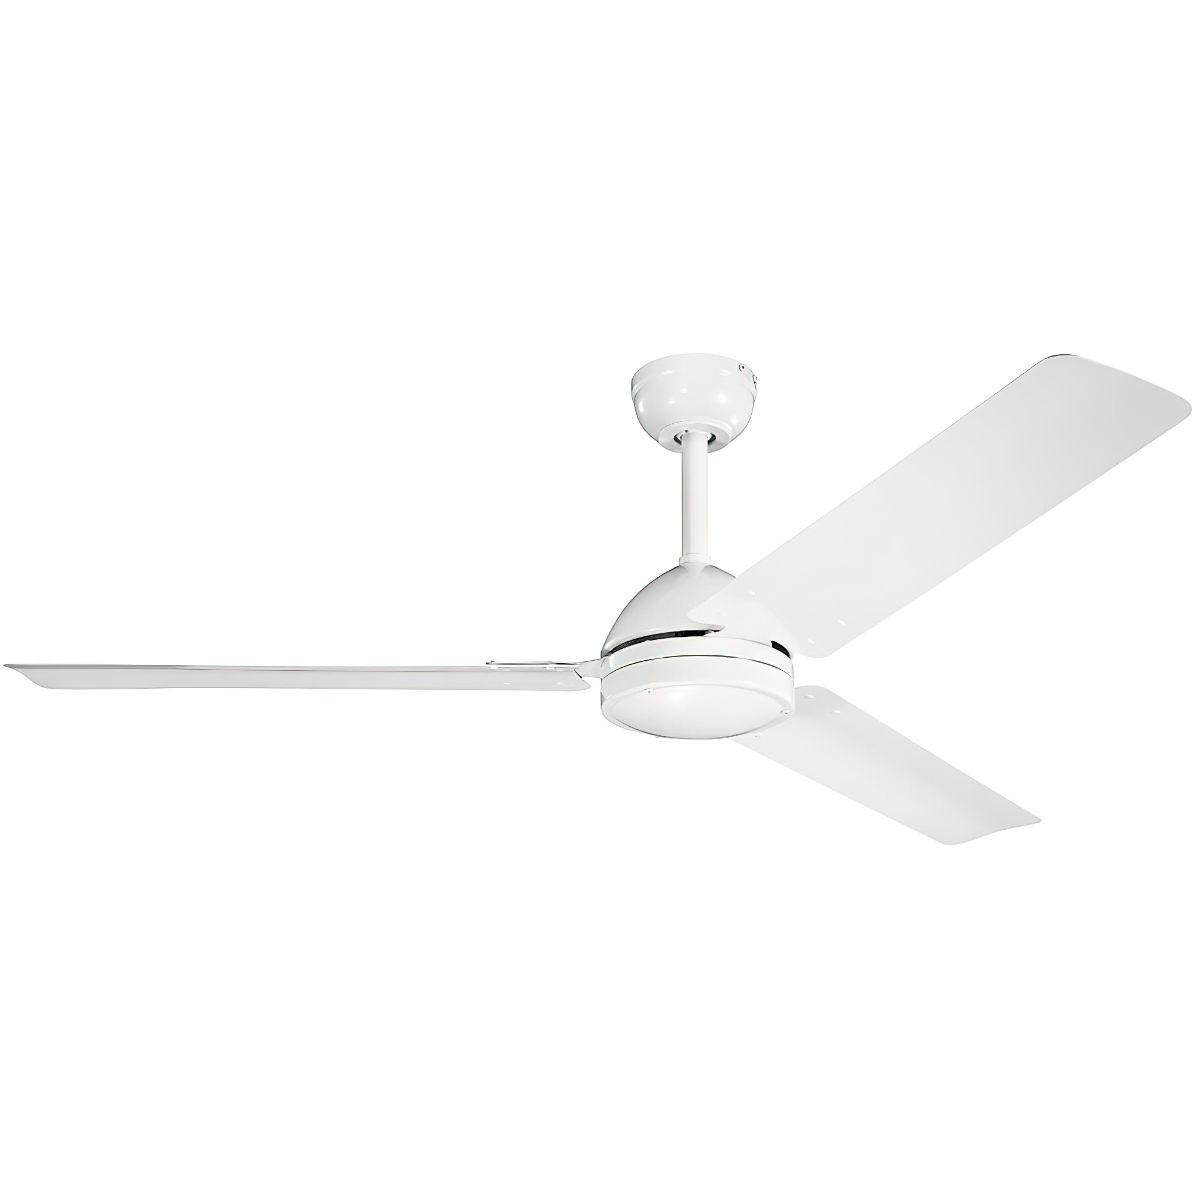 Todo 56 Inch Ceiling Fan With Wall Control - Bees Lighting